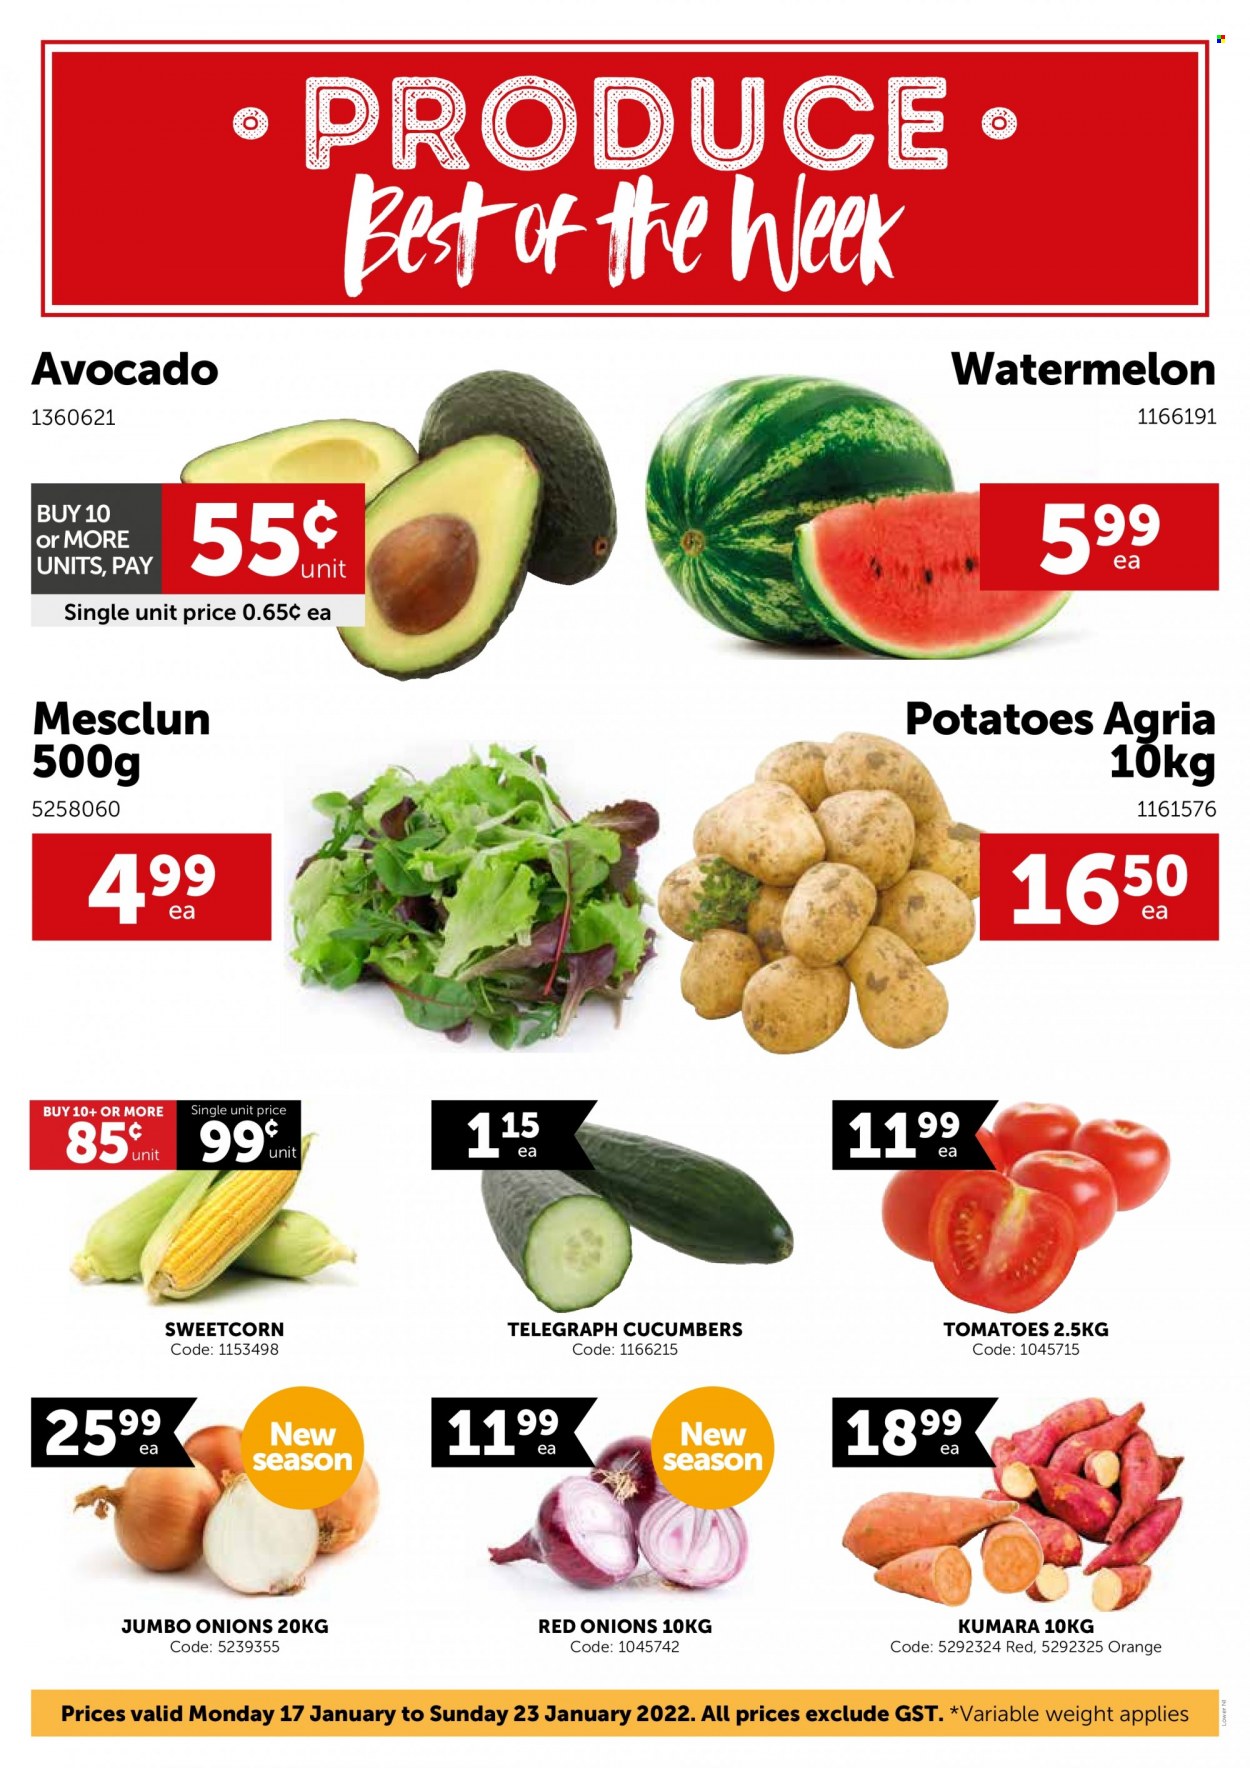 thumbnail - Gilmours mailer - 17.01.2022 - 23.01.2022 - Sales products - cucumber, red onions, tomatoes, potatoes, onion, mesclun, avocado, watermelon, oranges. Page 1.